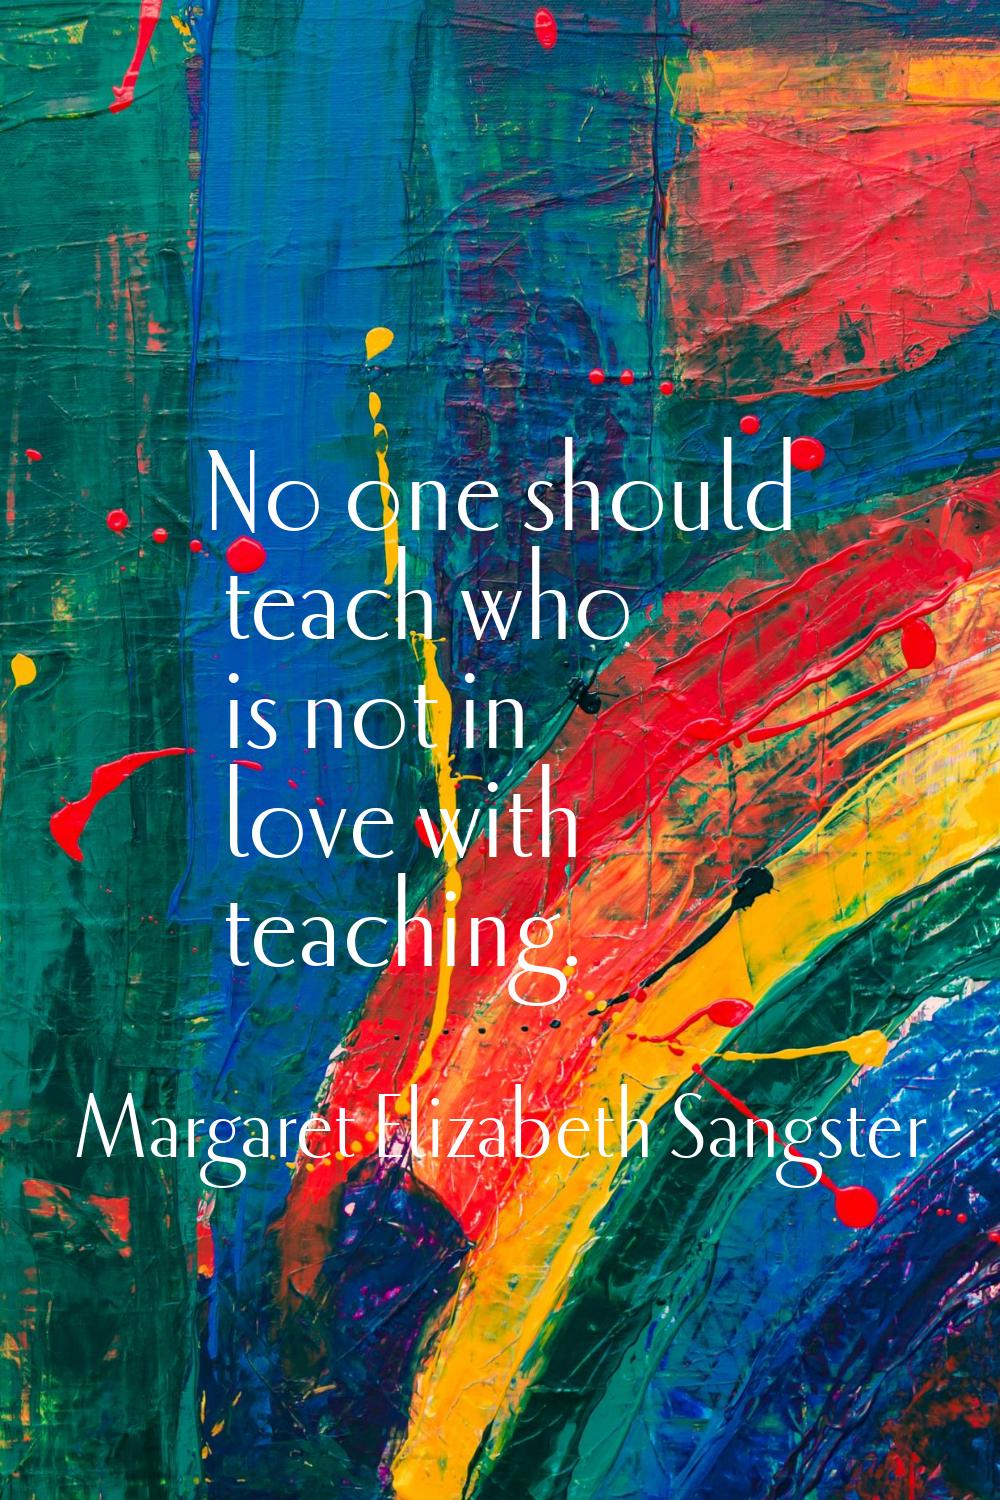 No one should teach who is not in love with teaching.